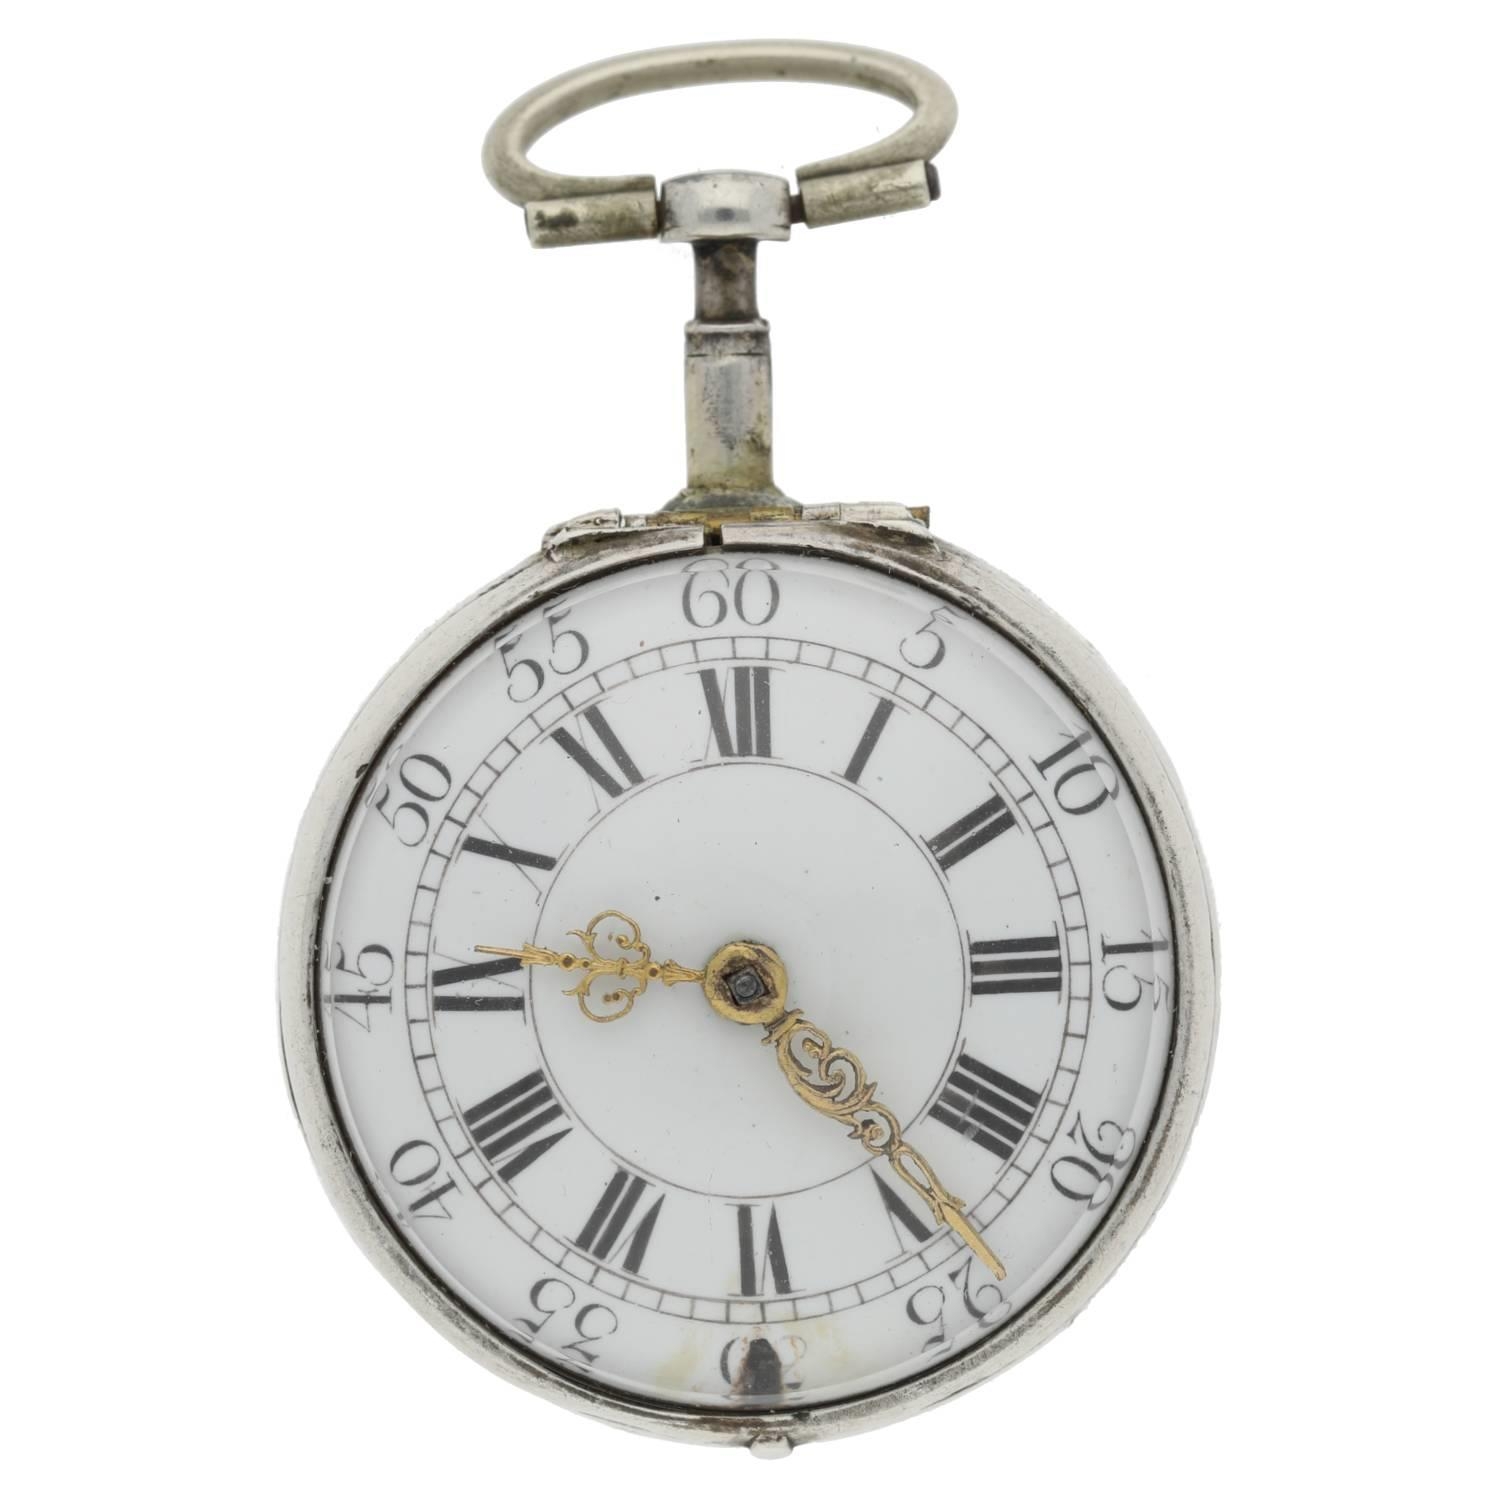 Tomson, London - English 18th century silver pair cased verge pocket watch, signed fusee movement, - Image 3 of 7